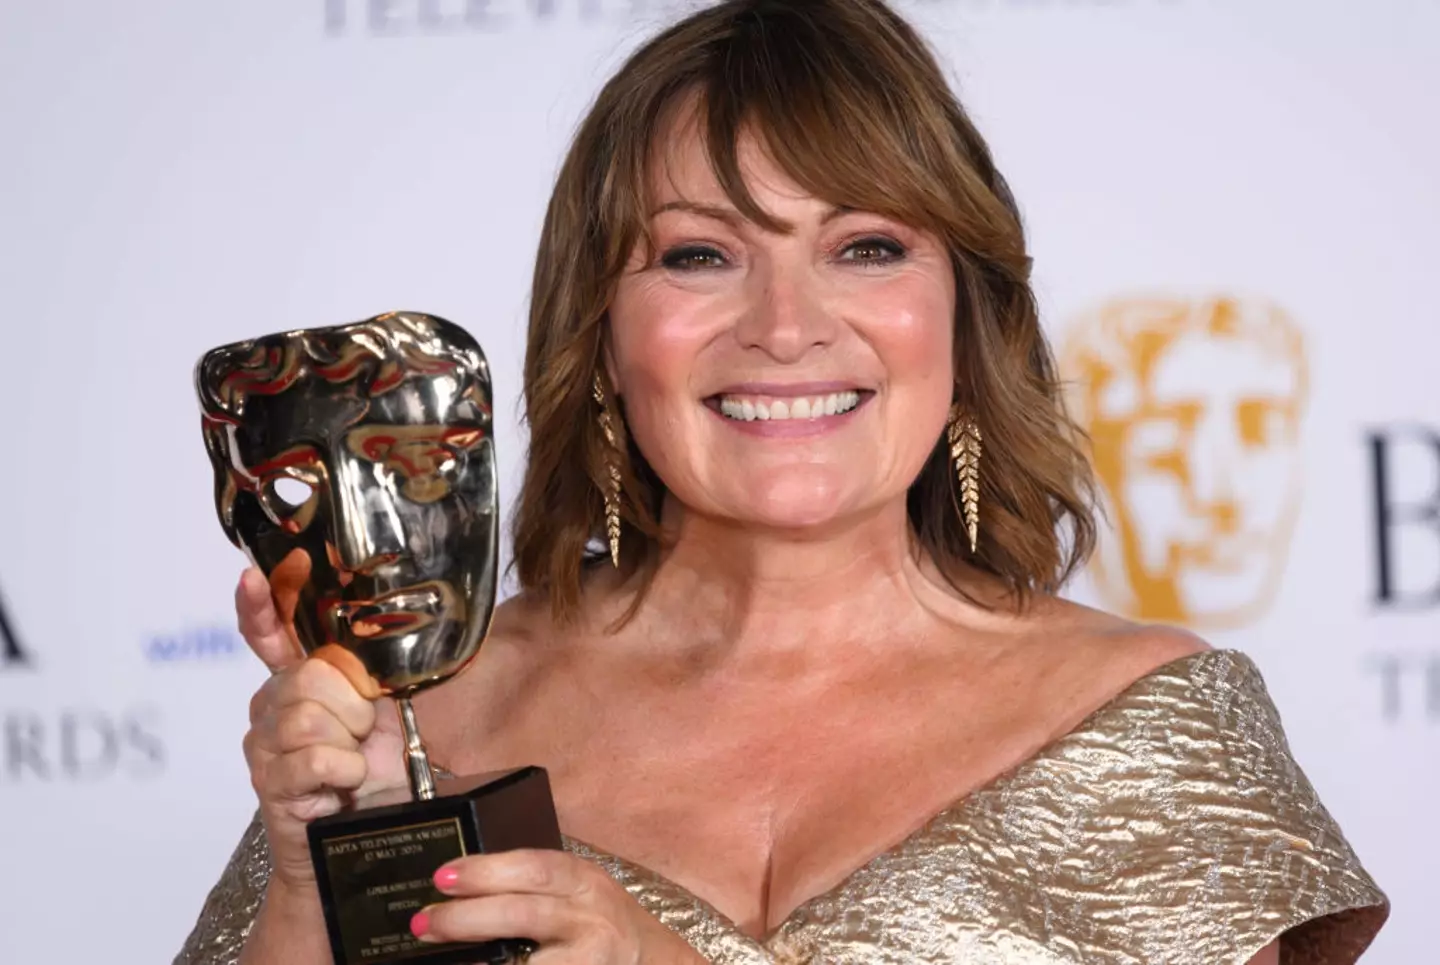 Lorraine Kelly was given a special award at last night's BAFTA ceremony. (Karwai Tang/WireImage)